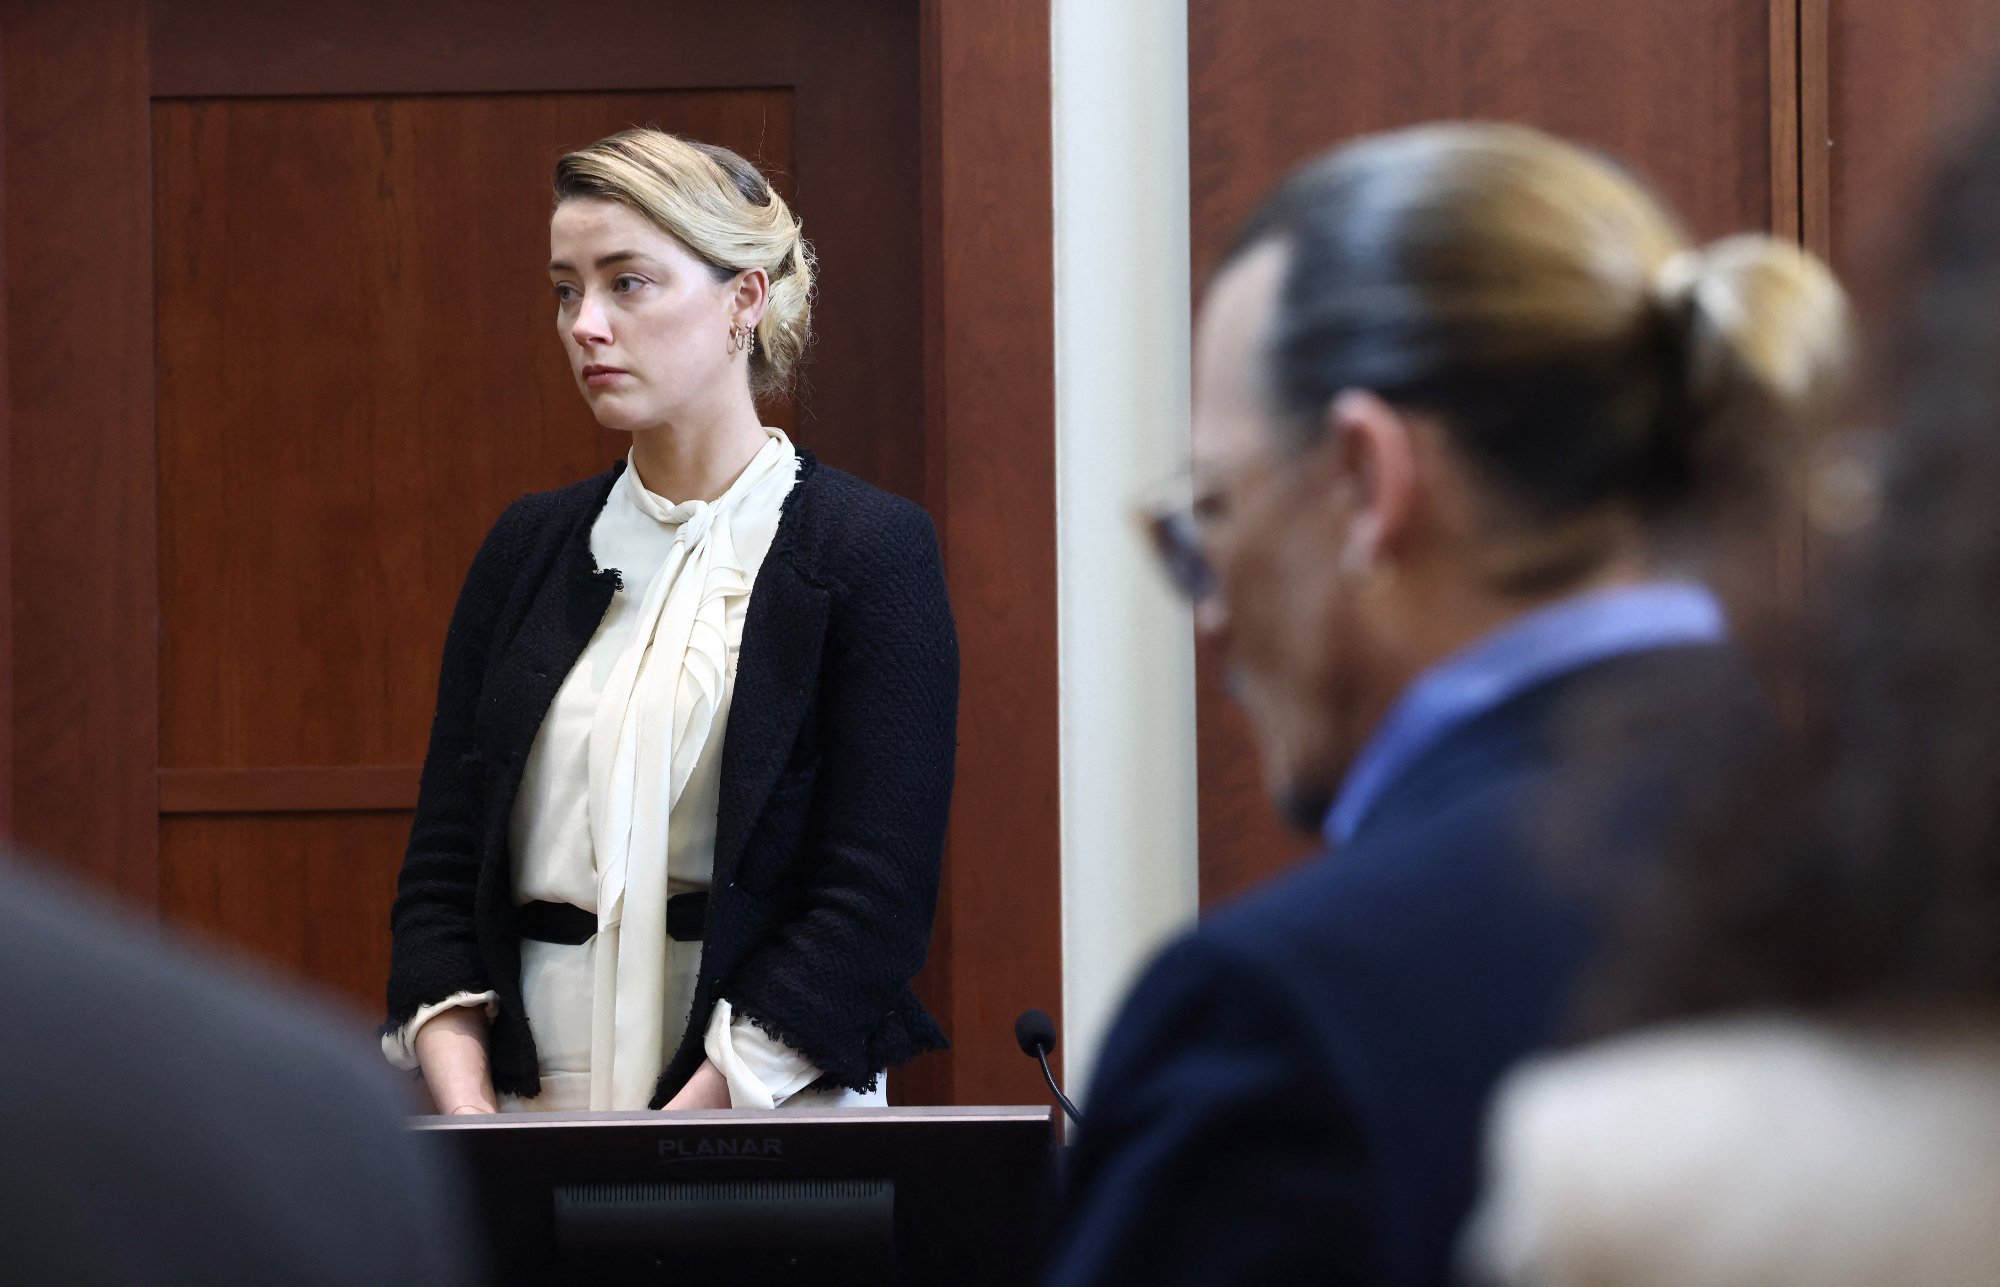 Amber Heard and Johnny Depp in court to testify for the jury to determine a winner in the defamation case. Heard is standing looking to the side and Depp is in the foreground with sunglasses on.